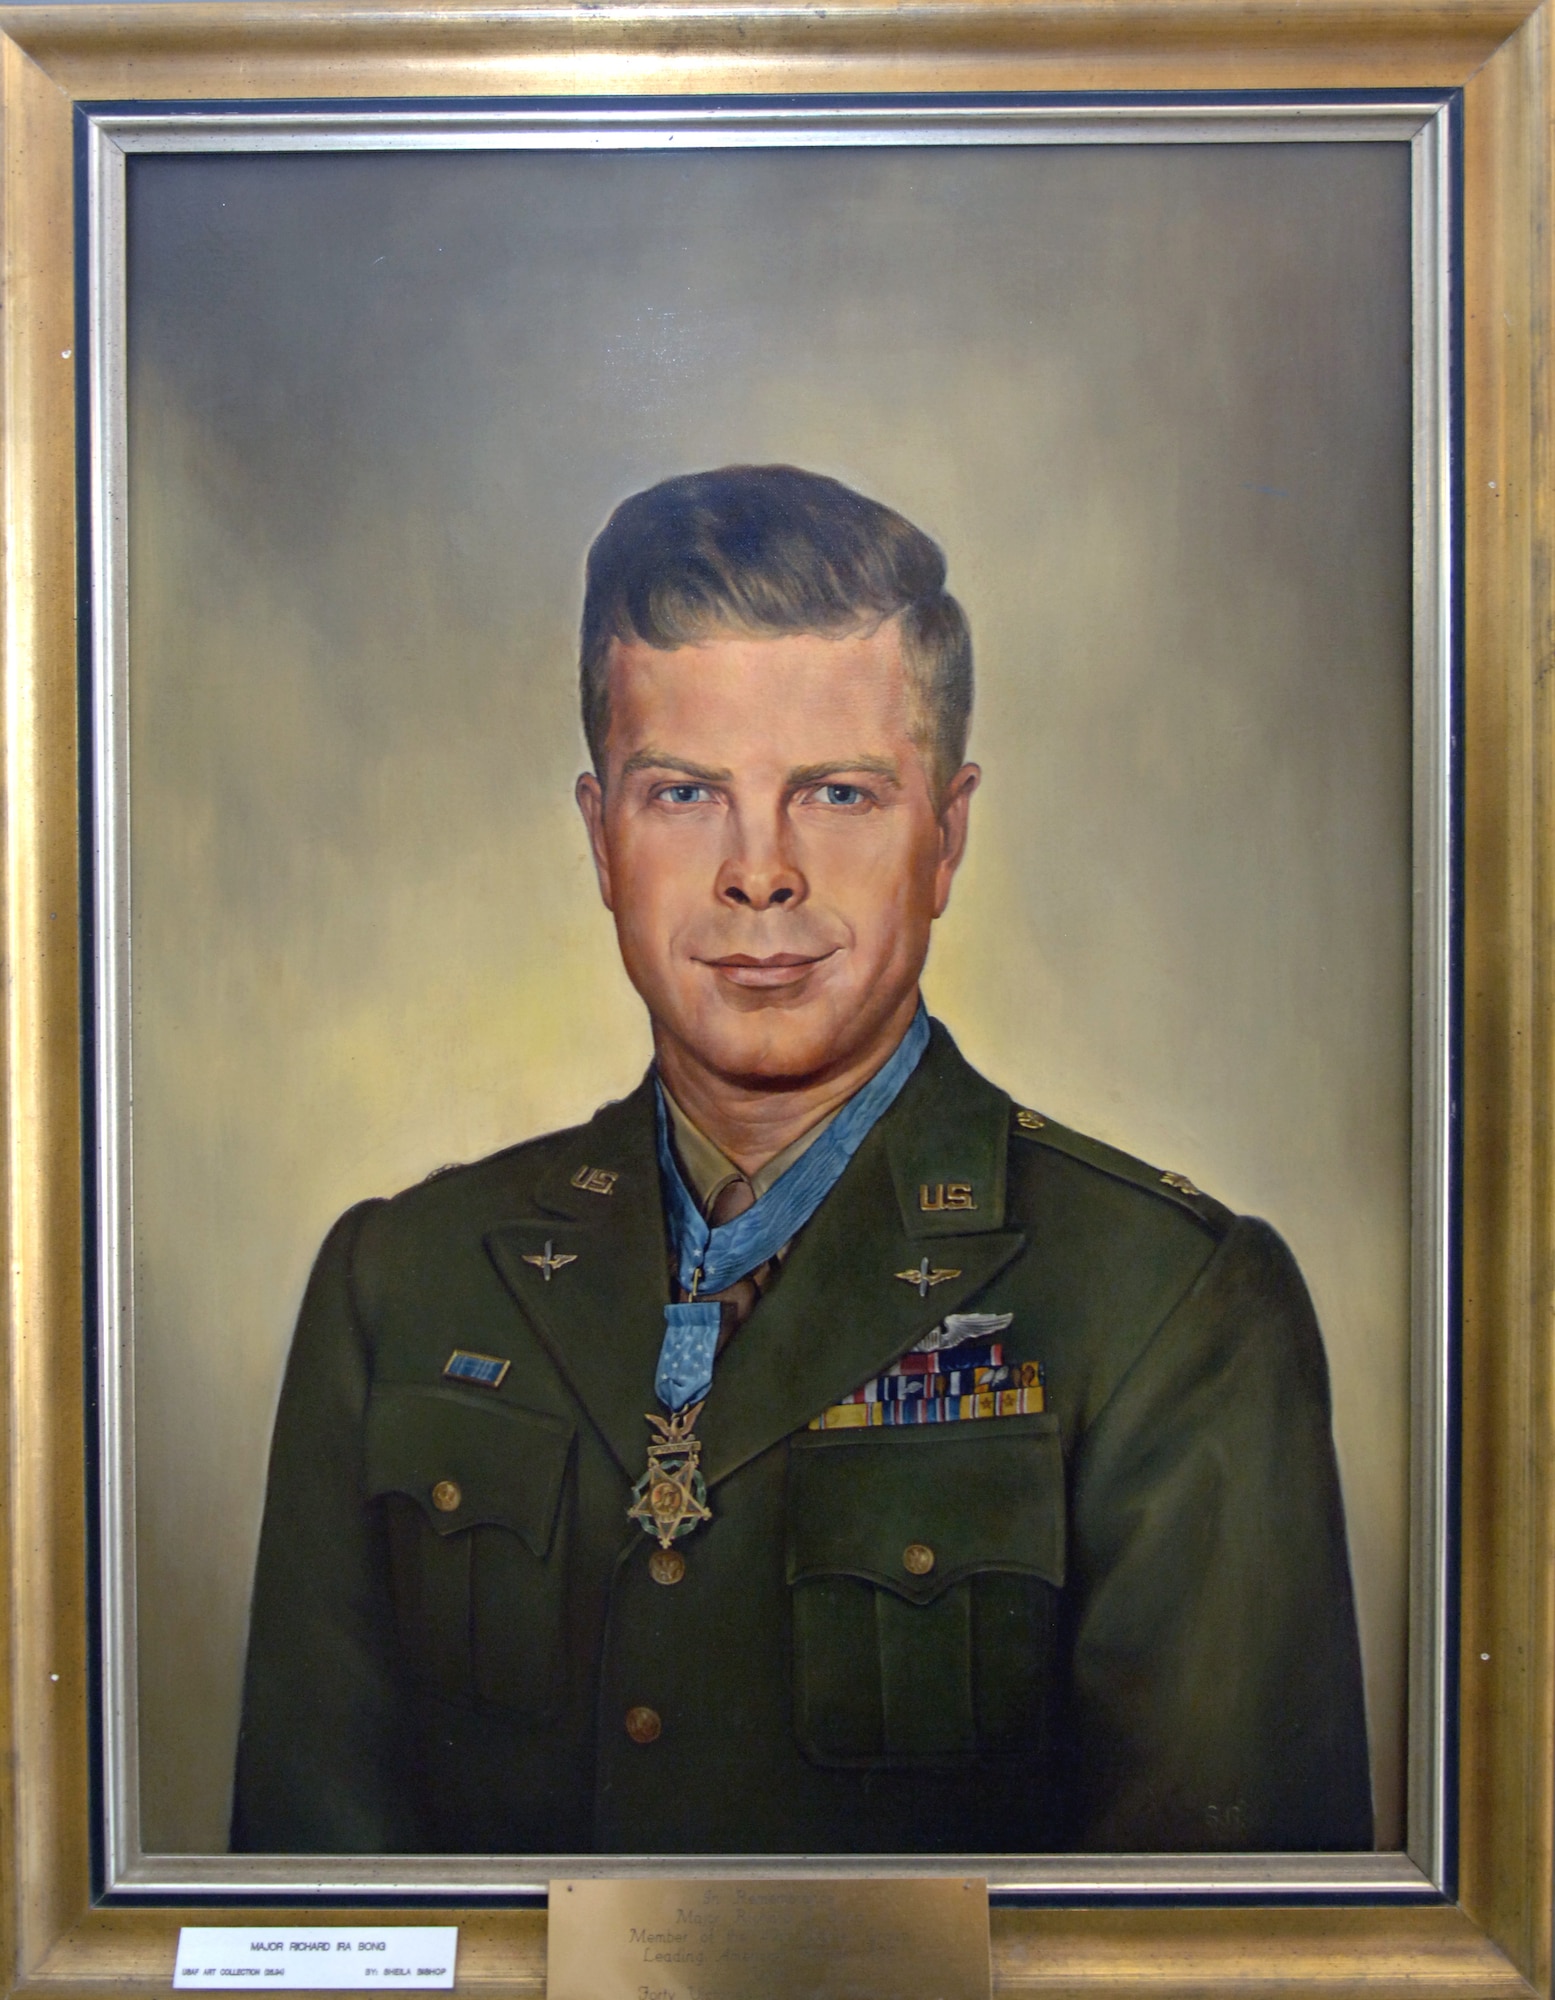 Richard Ira "Dick" Bong (Sept. 24, 1920 - Aug. 6, 1945) is the United States' highest-scoring ace, having shot down 40 Japanese aircraft during World War II, and is a Medal of Honor recipient. He was a fighter pilot in the U.S. Army Air Forces assigned to the 49th Pursuit Group (now the 49th Fighter Wing at Holloman Air Force Base, N.M.). His portrait hangs in the wing headquarters building along with photos from his days as a "Fightin' Forty-Niner." (U.S. Air Force photo/Airman 1st Class Veronica Salgado)